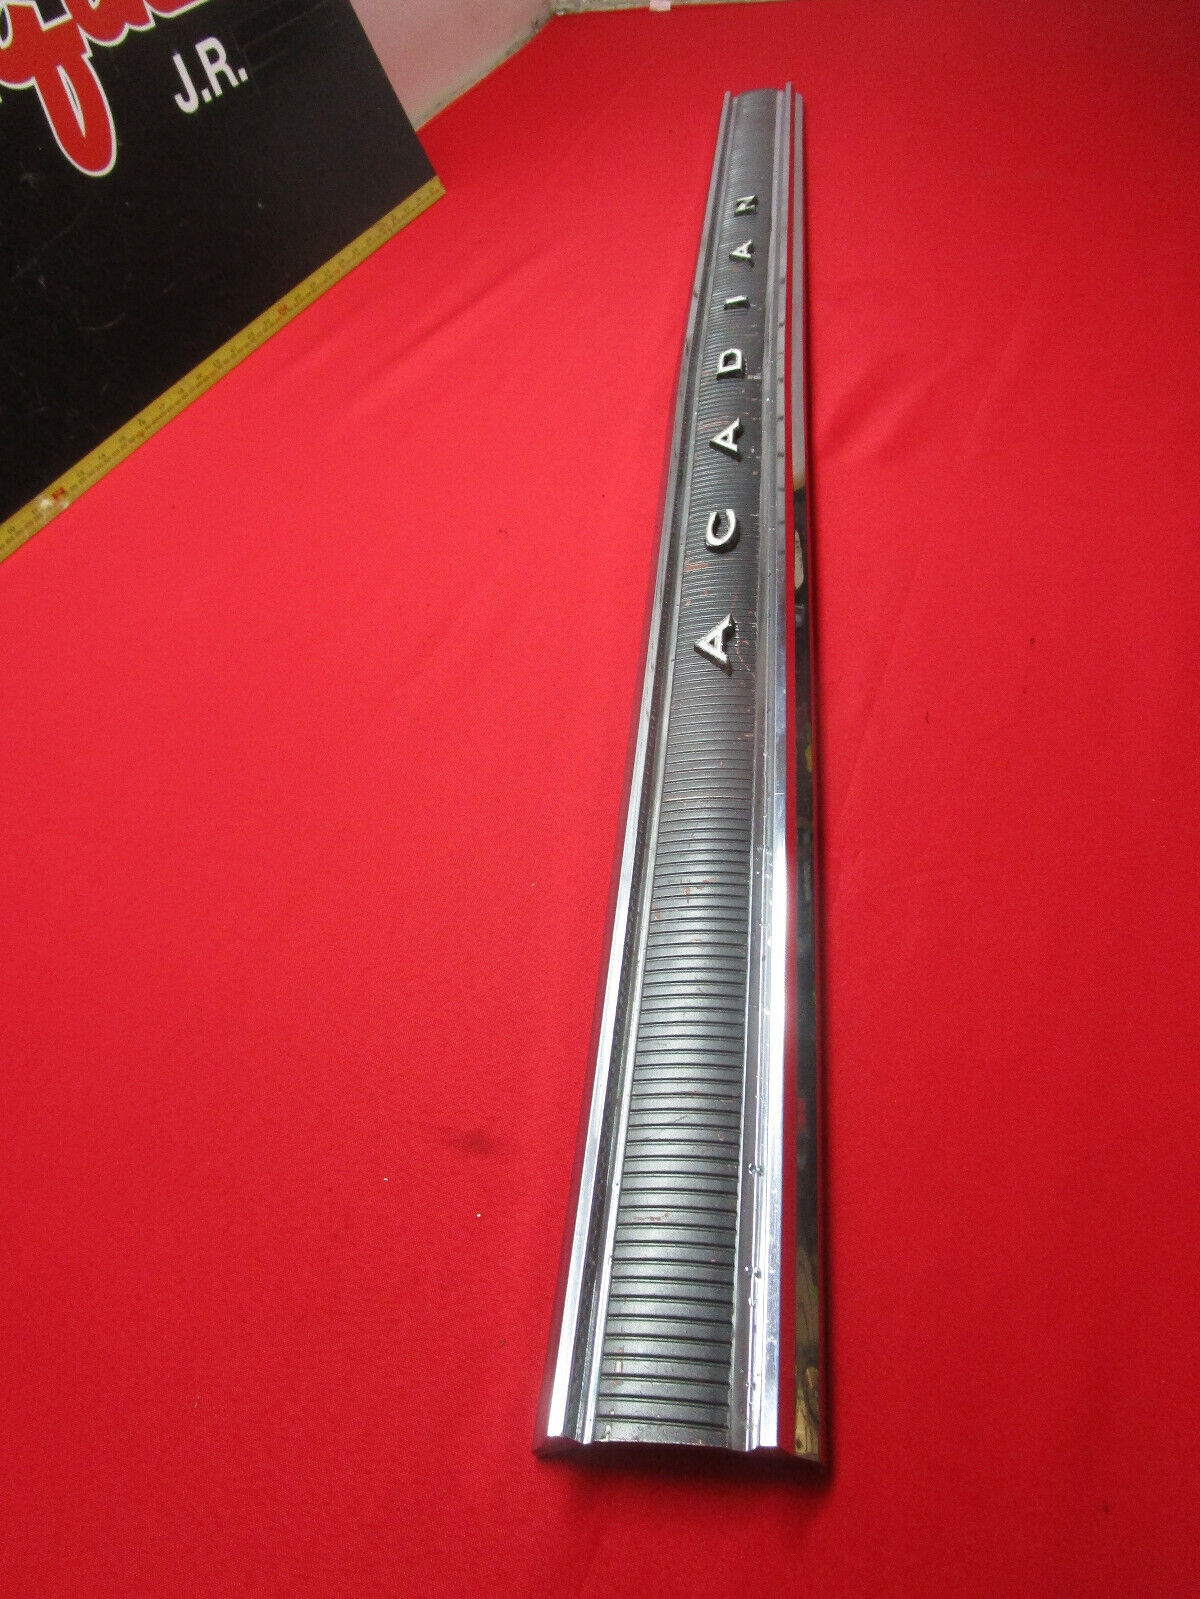 1964 PONTIAC ACADIAN BEAUMONT SPORT DELUXE TRUNK LID MOLDING TAIL TRIM VERY RARE